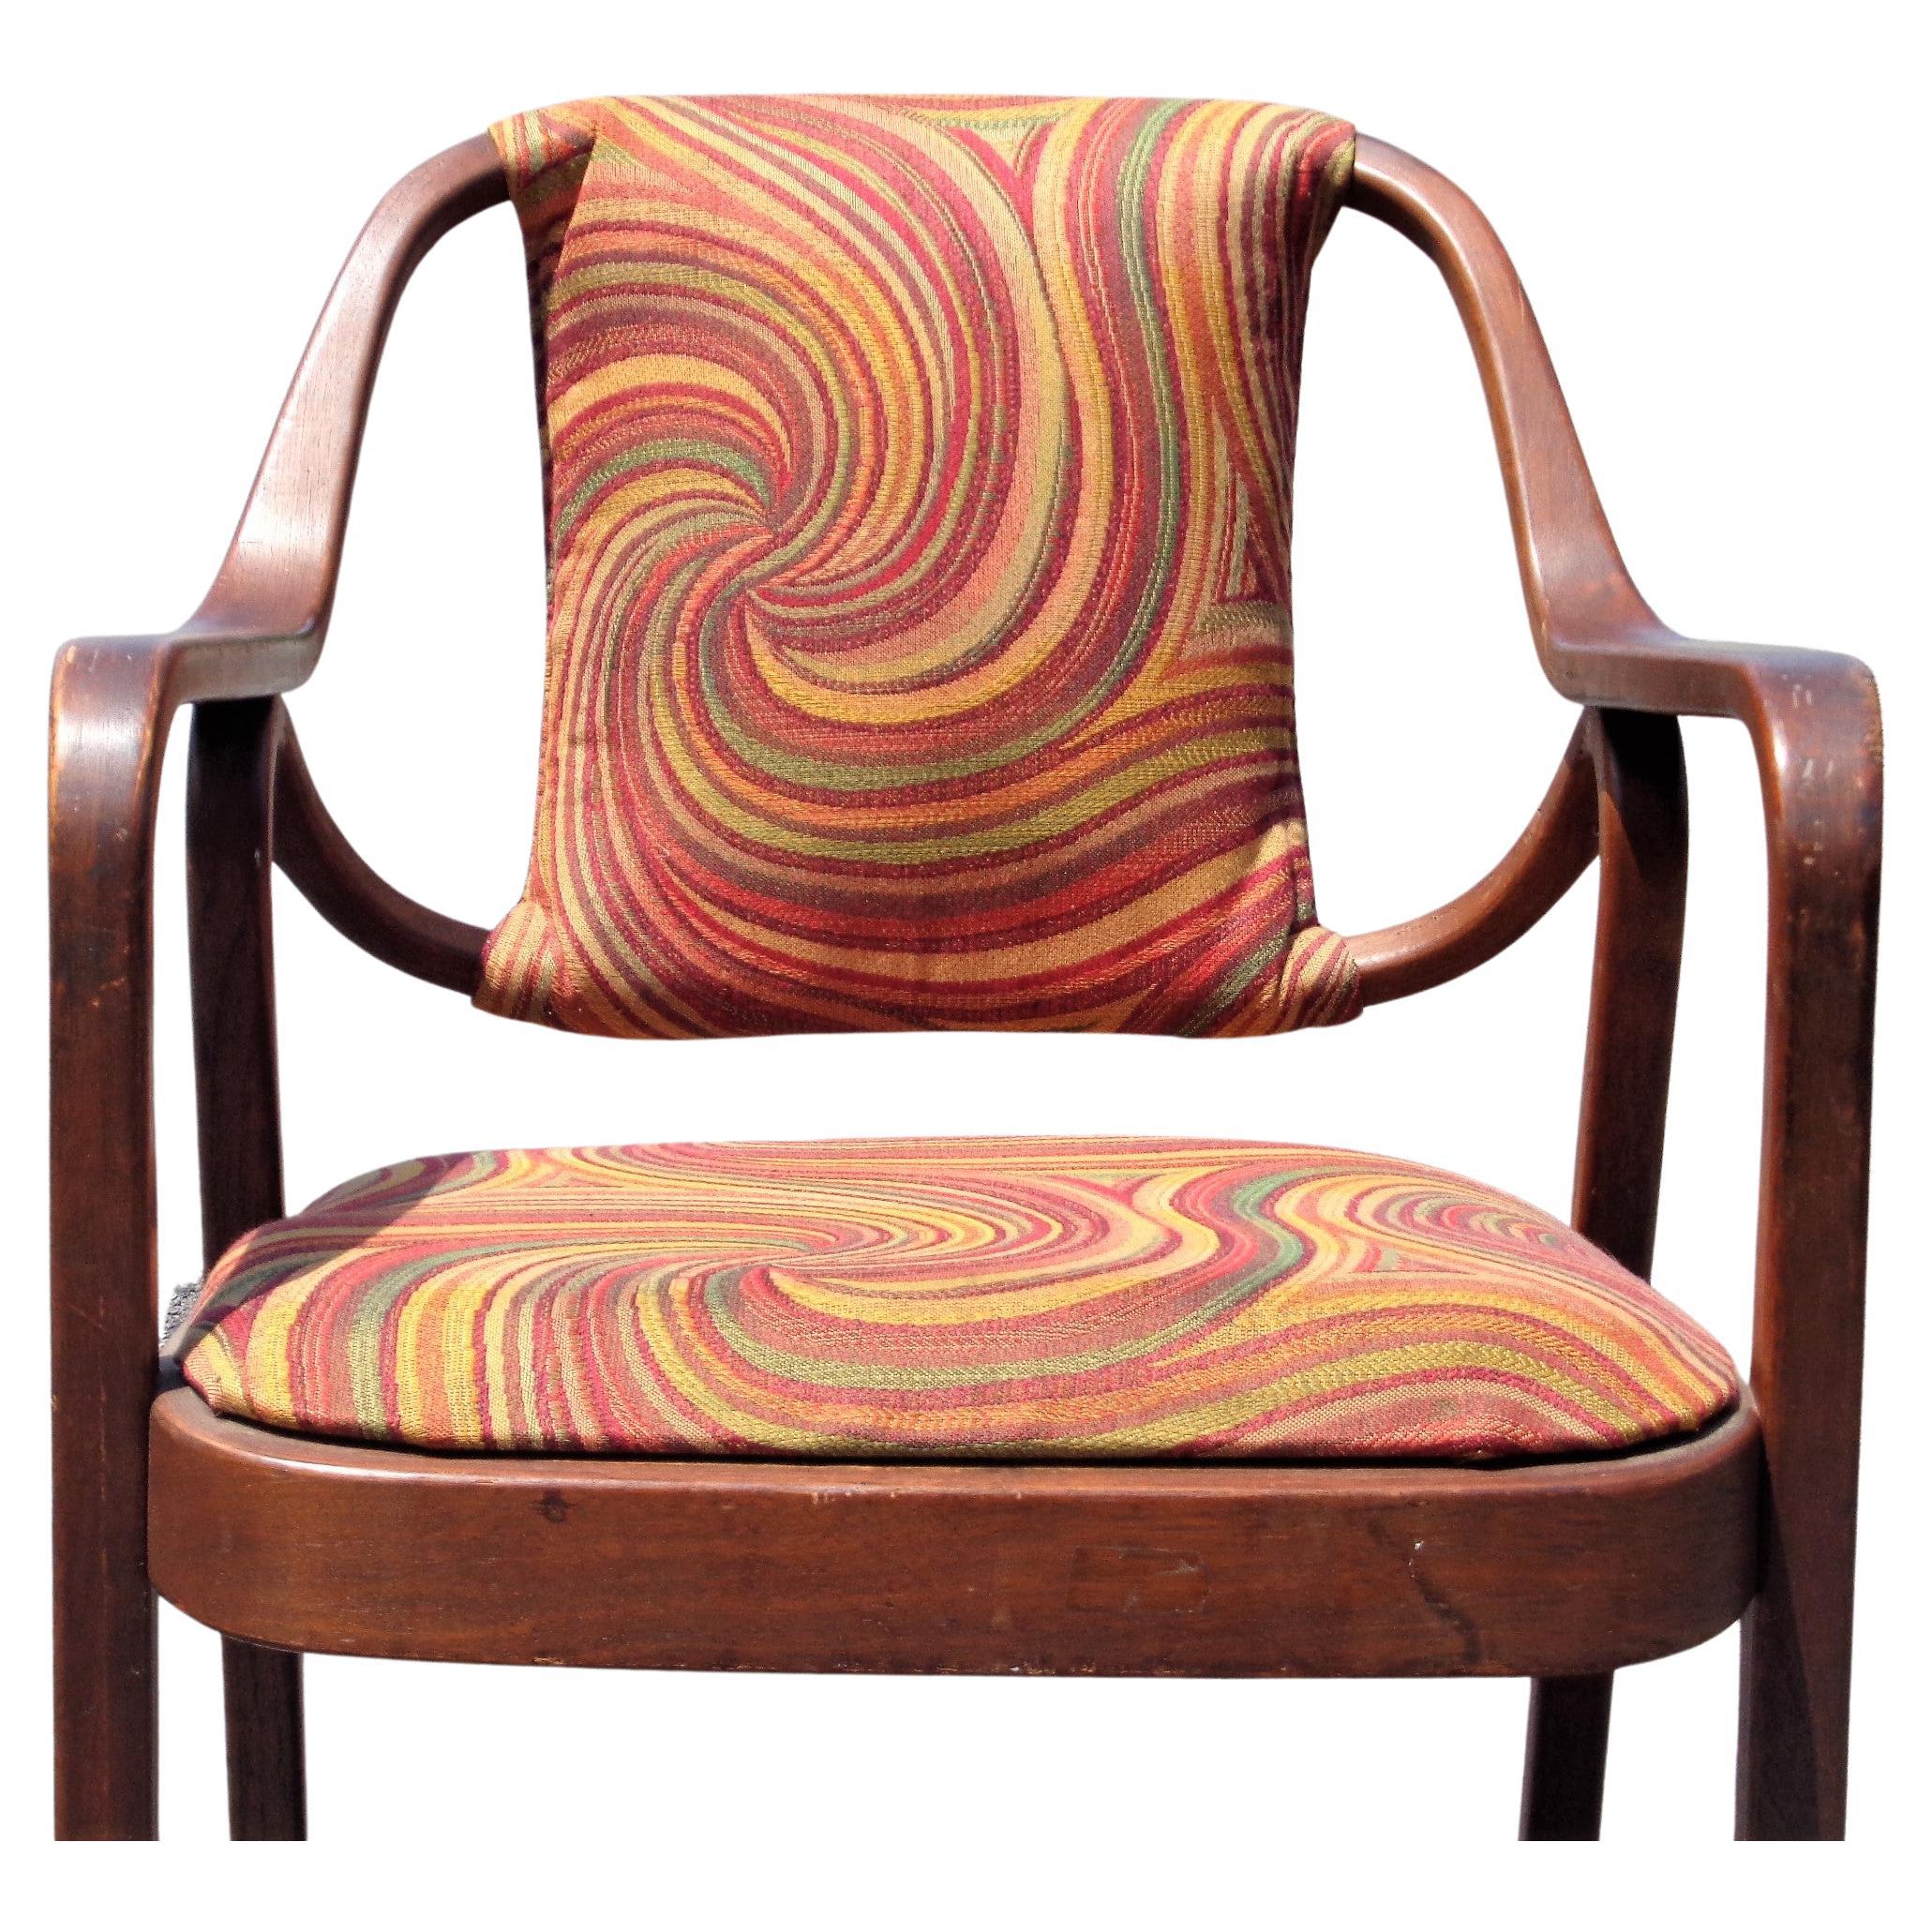 Bentwood walnut armchair #1105 by Don Pettit for Knoll w/ beautiful color patina to wood and the original vibrant op art style textured upholstery. Retains Knoll International label on underside - 320 Park Avenue NYC, 10022 - a very nice example of